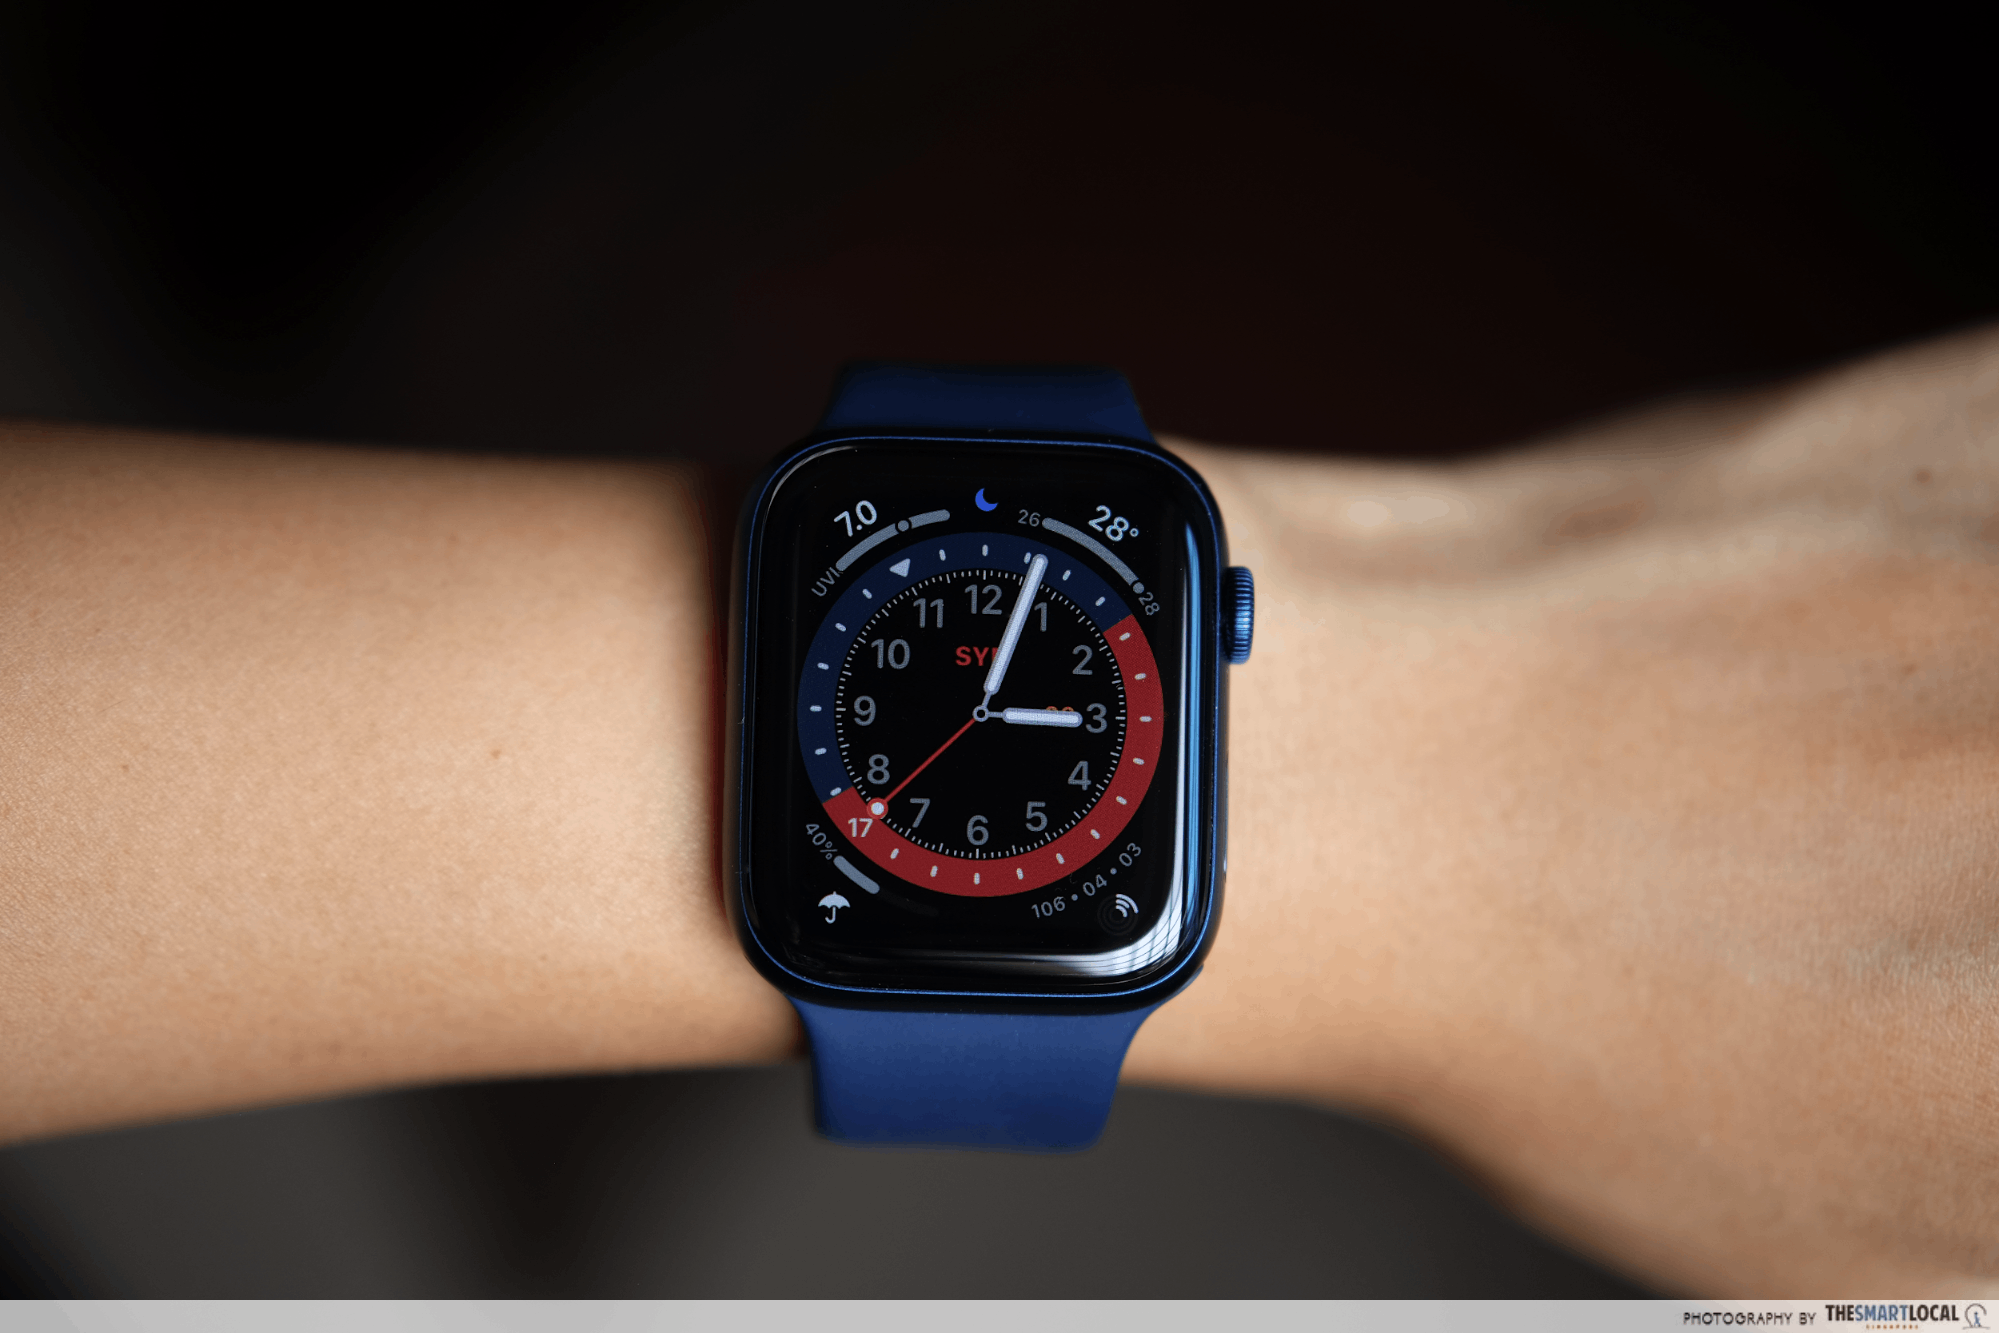 apple watch singapore 2020 price guide - the new gmt face